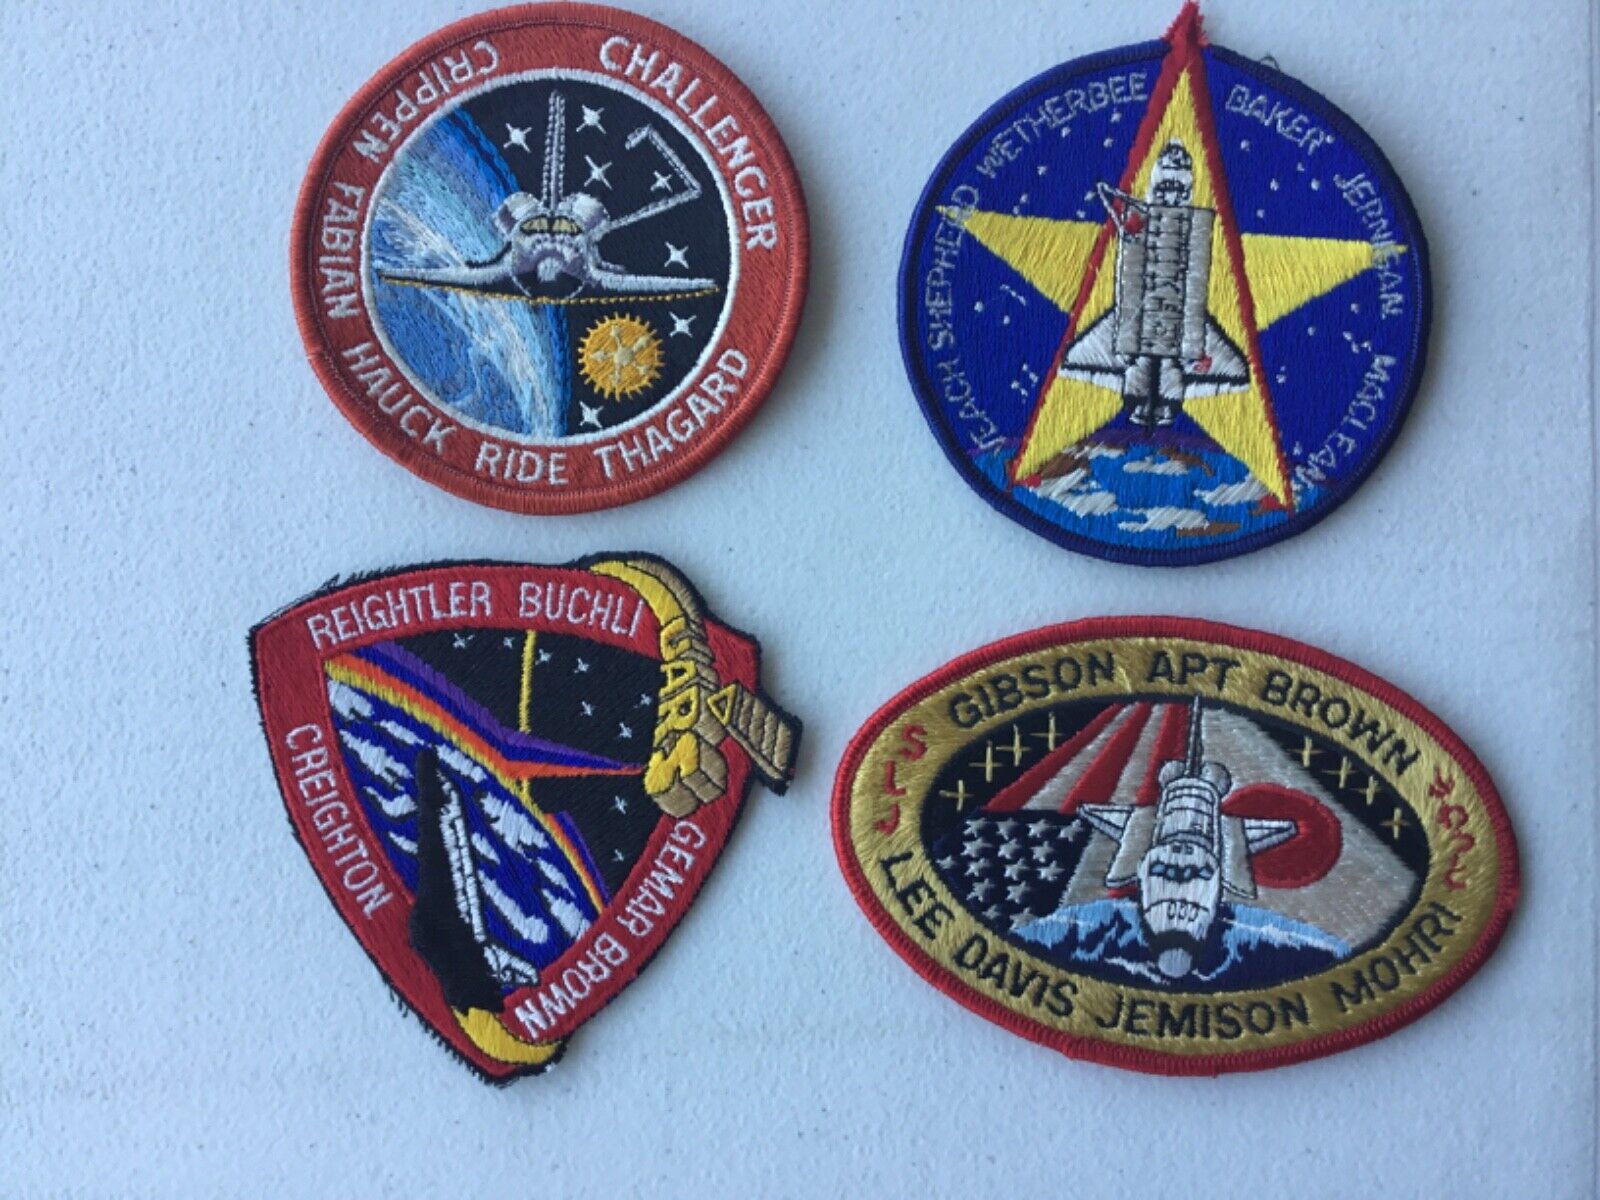 Lot of 4 NASA SPACE SHUTTLE Patches STS-48 STS-7 STS-47 STS-52 Challenger